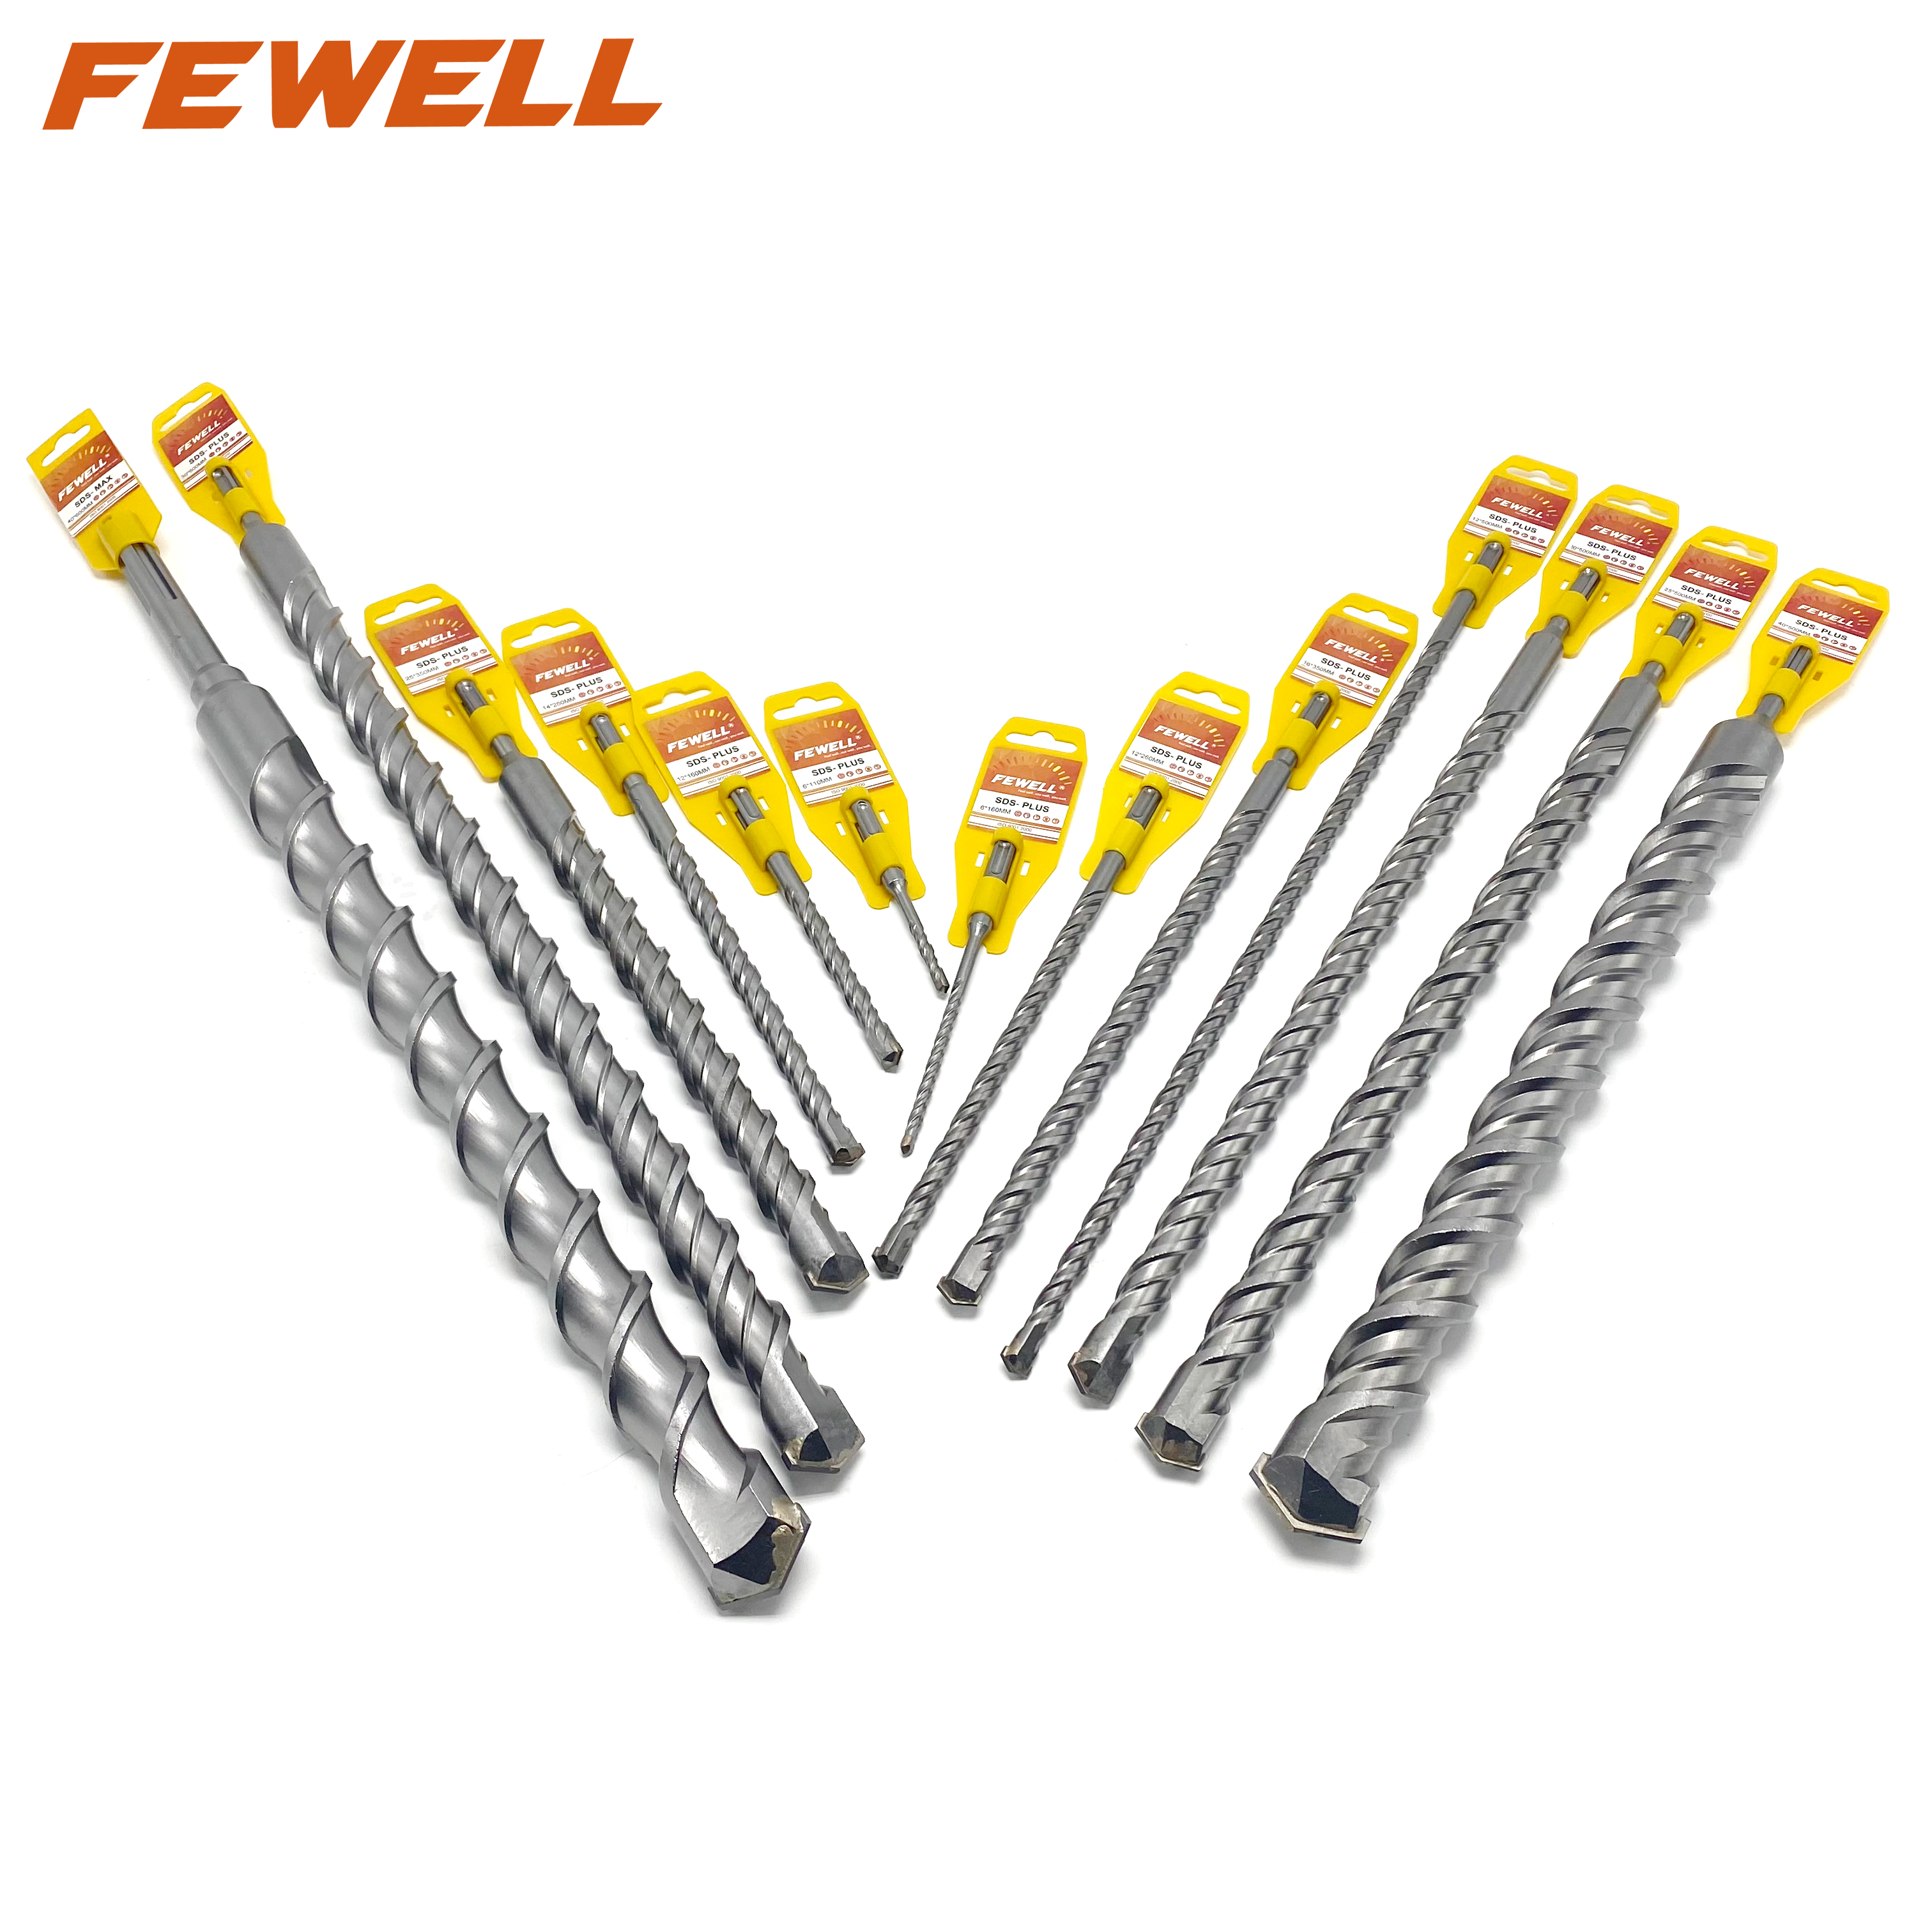 High quality SDS Plus Carbide Single Flat Tip 35*500/600/800/1000mm Double Flute Electric Hammer Drill Bit for Concrete wall Masonry Hard Stone Granite sds masonry drill bits 